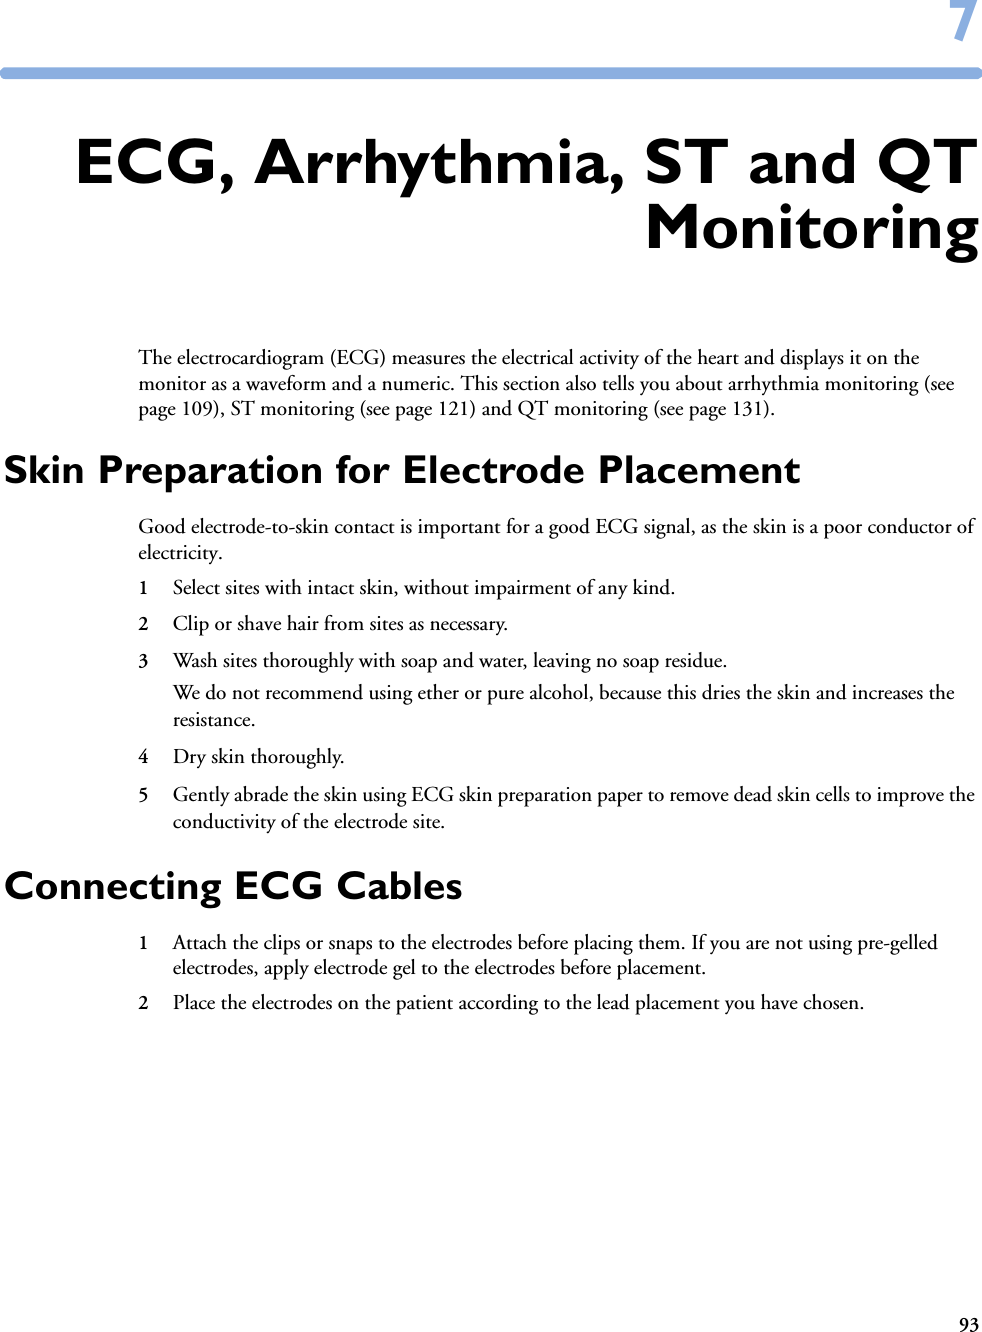 9377ECG, Arrhythmia, ST and QTMonitoringThe electrocardiogram (ECG) measures the electrical activity of the heart and displays it on the monitor as a waveform and a numeric. This section also tells you about arrhythmia monitoring (see page 109), ST monitoring (see page 121) and QT monitoring (see page 131).Skin Preparation for Electrode PlacementGood electrode-to-skin contact is important for a good ECG signal, as the skin is a poor conductor of electricity.1Select sites with intact skin, without impairment of any kind.2Clip or shave hair from sites as necessary.3Wash sites thoroughly with soap and water, leaving no soap residue. We do not recommend using ether or pure alcohol, because this dries the skin and increases the resistance.4Dry skin thoroughly.5Gently abrade the skin using ECG skin preparation paper to remove dead skin cells to improve the conductivity of the electrode site.Connecting ECG Cables1Attach the clips or snaps to the electrodes before placing them. If you are not using pre-gelled electrodes, apply electrode gel to the electrodes before placement.2Place the electrodes on the patient according to the lead placement you have chosen. 